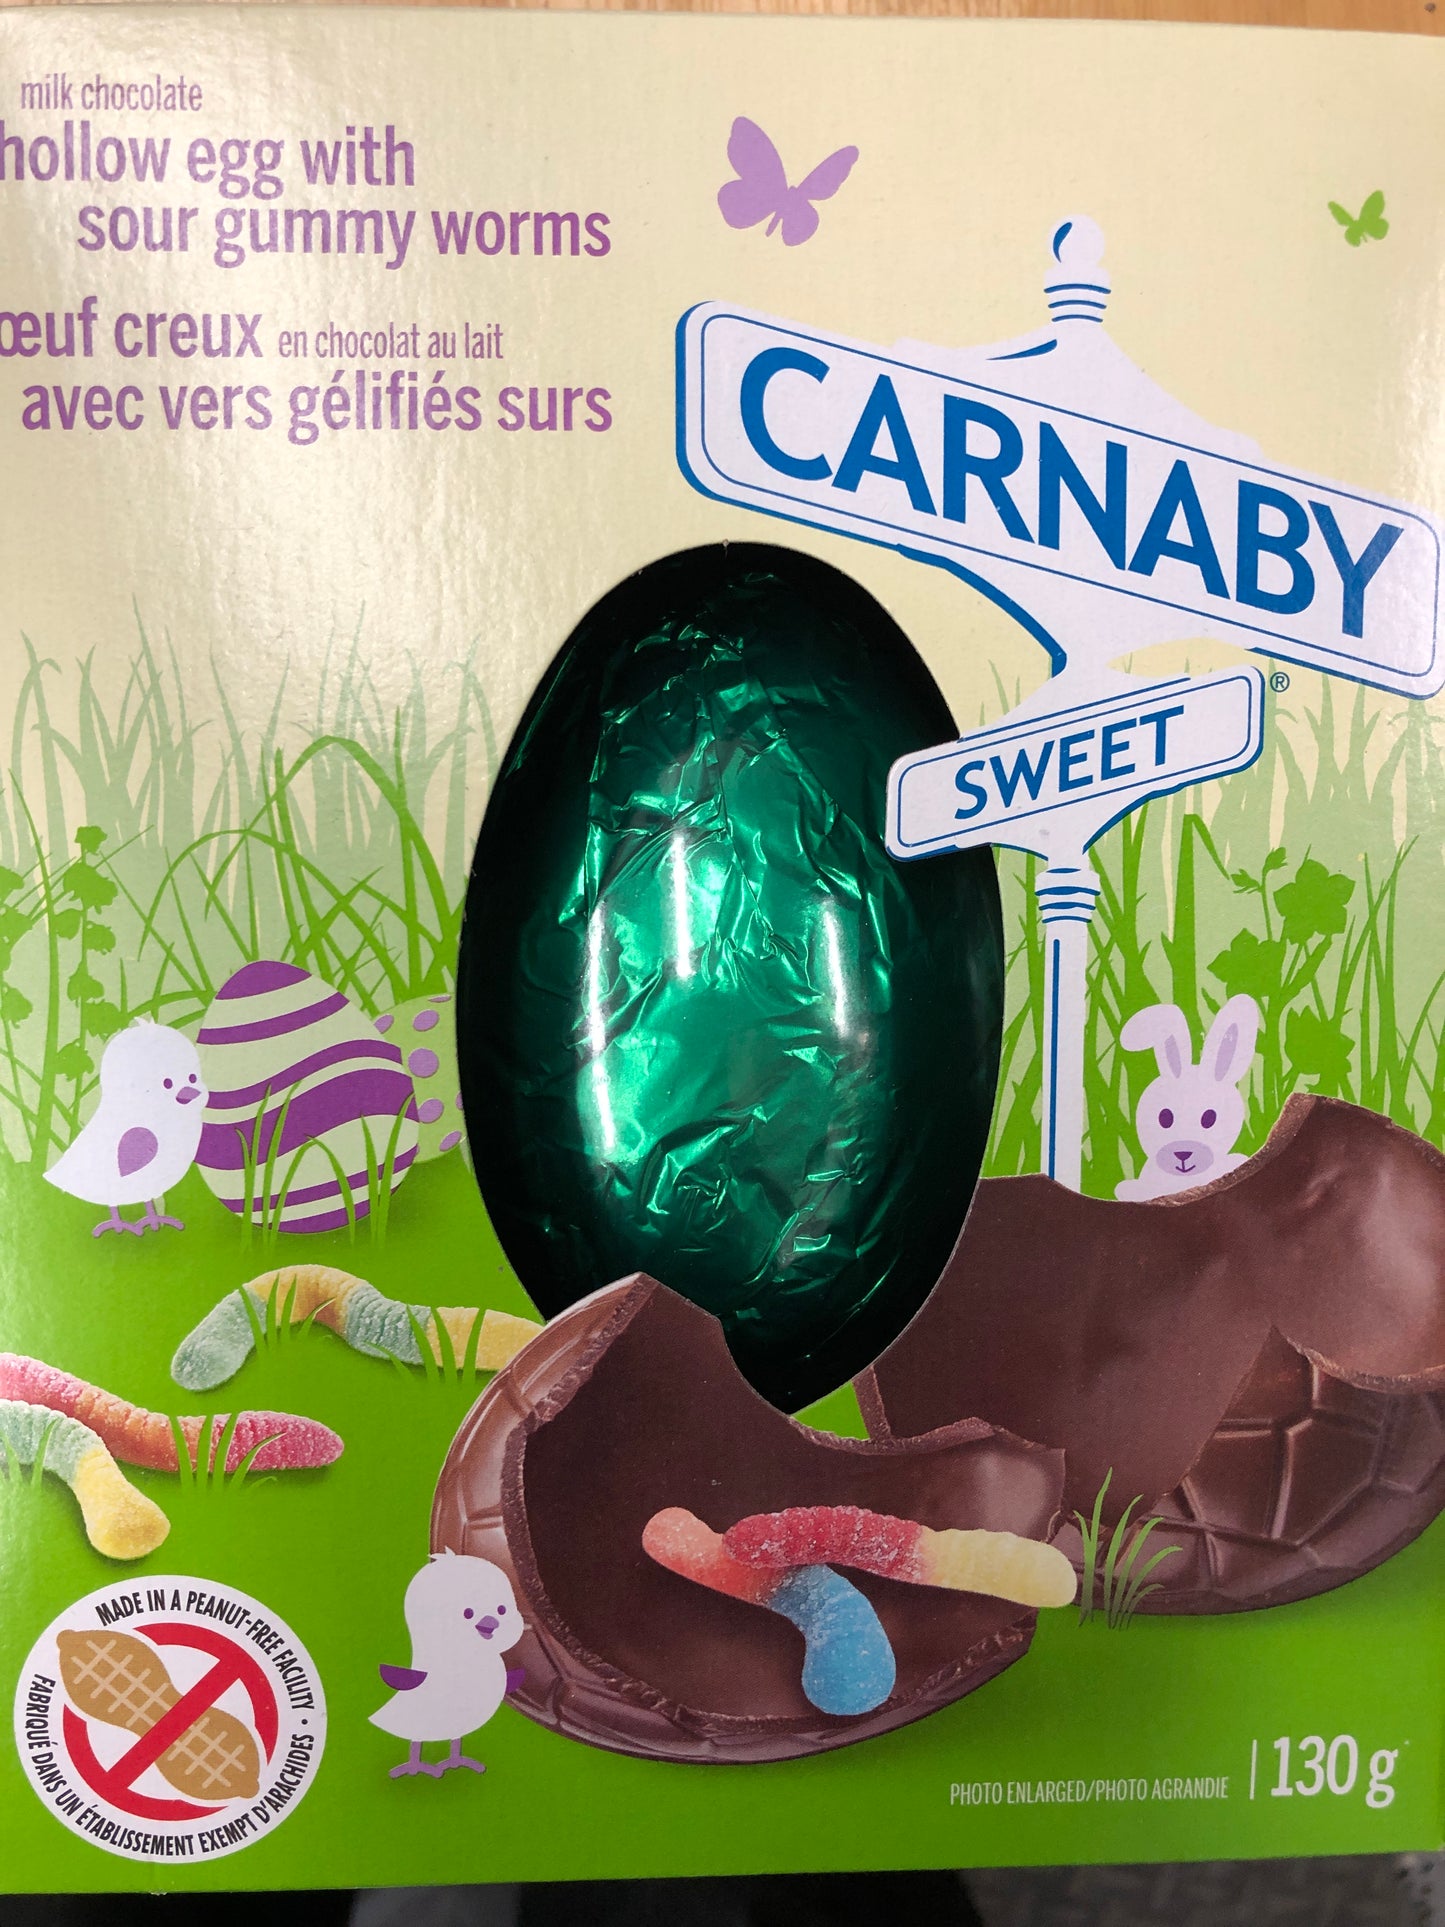 Carnaby milk chocolate hollow egg with sour gummy worms